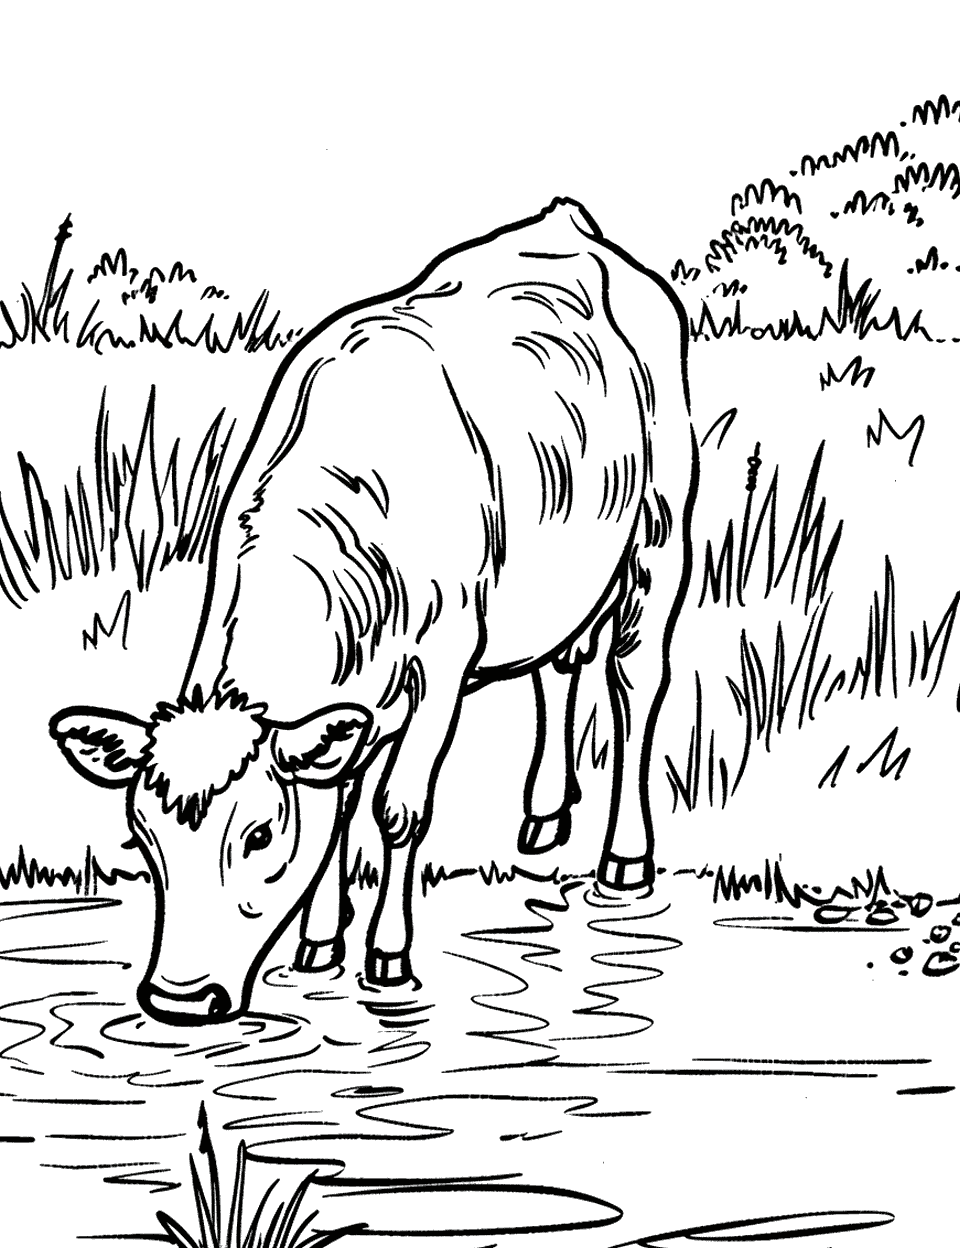 Cow Drinking from a Pond Farm Animal Coloring Page - A cow bending down to drink water from a clear pond.